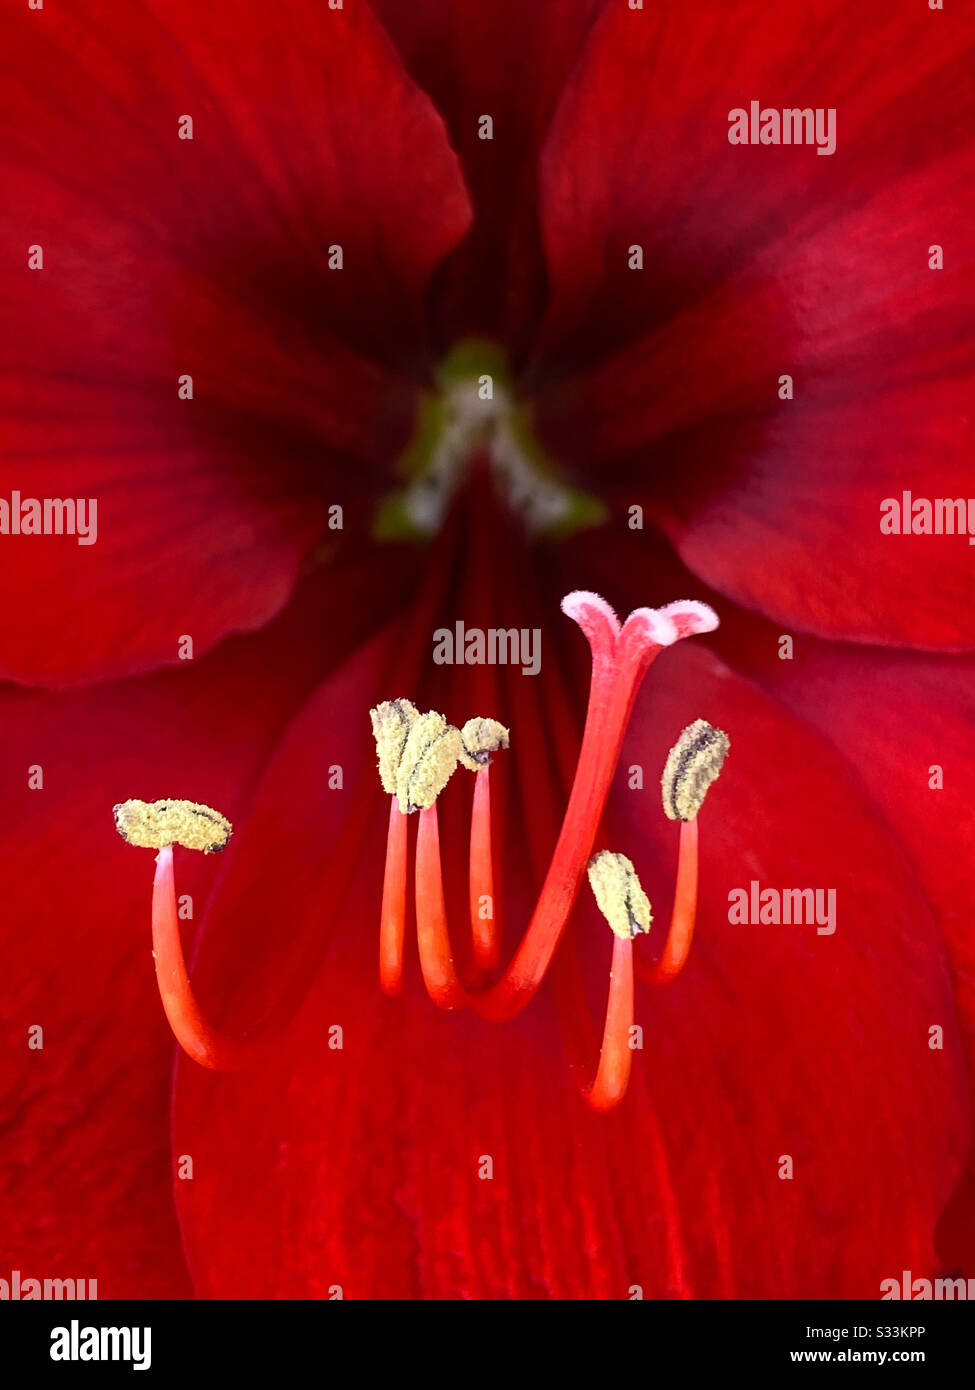 Stamens, anthers and pistil of a red amaryllis flower Stock Photo